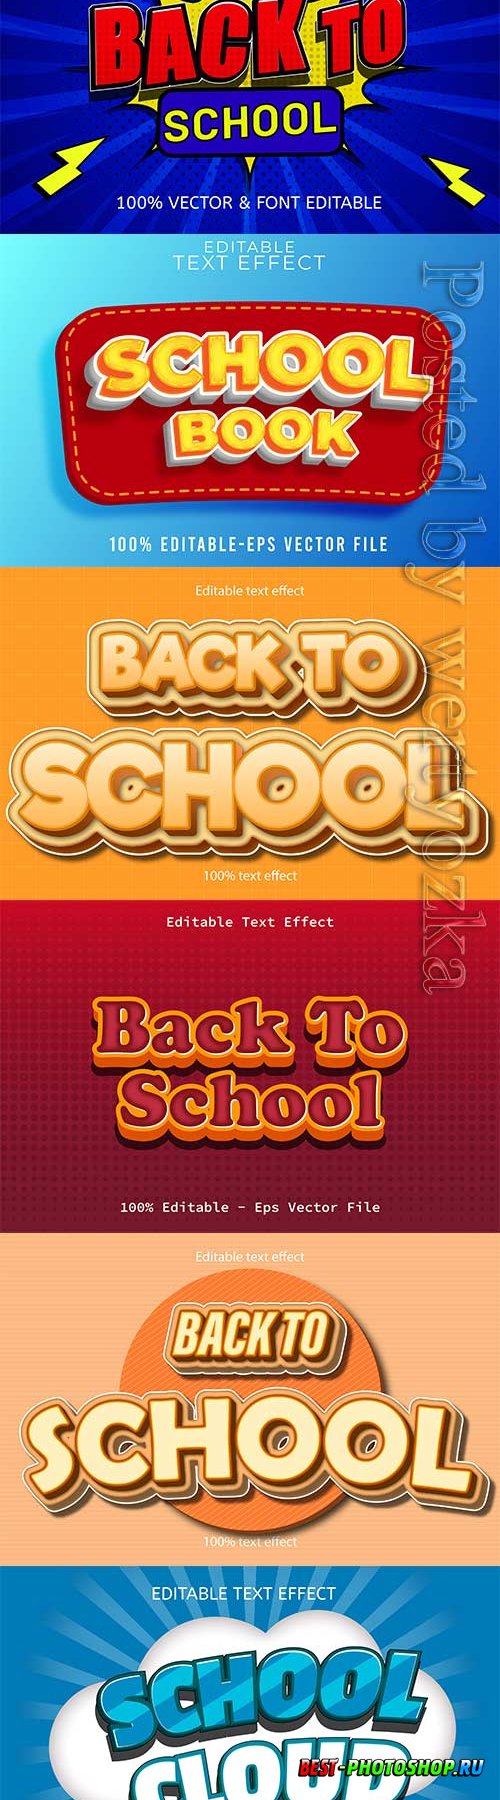 Back to school editable text effect vol 11